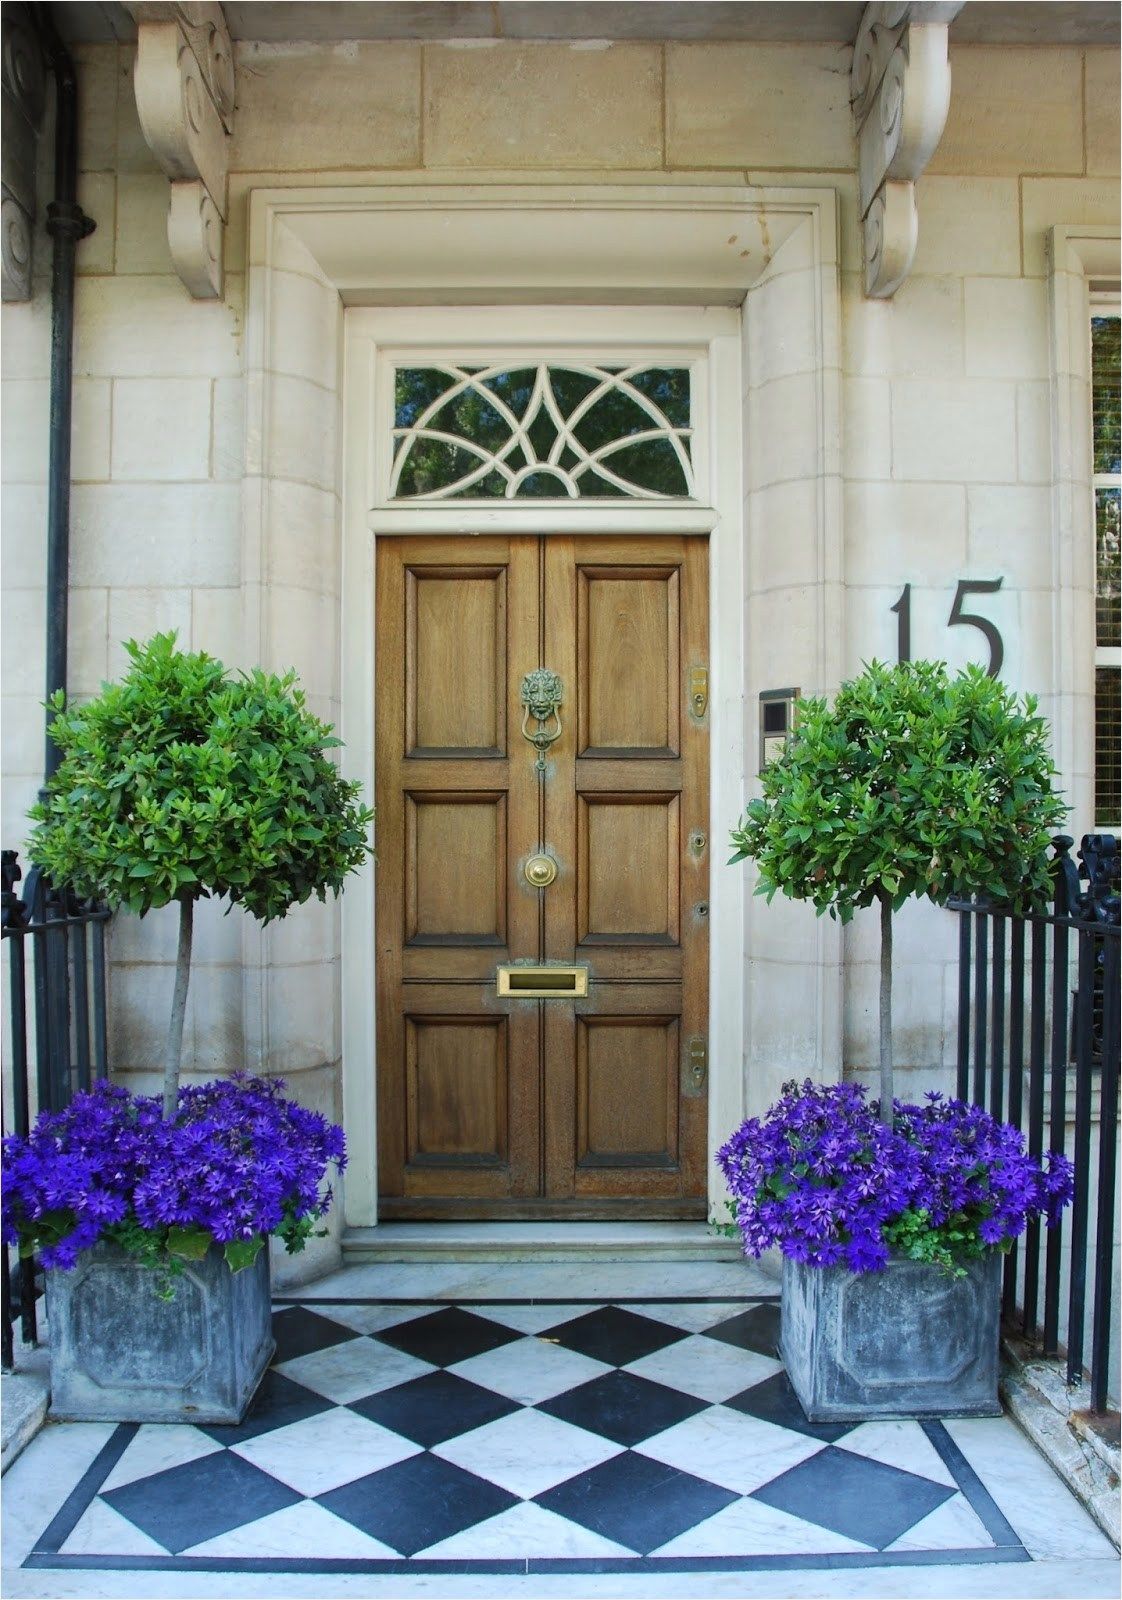 Outdoor Potted Plant Entryway Ideas June 2020 Best Front Doors -   14 planting Outdoor front doors ideas